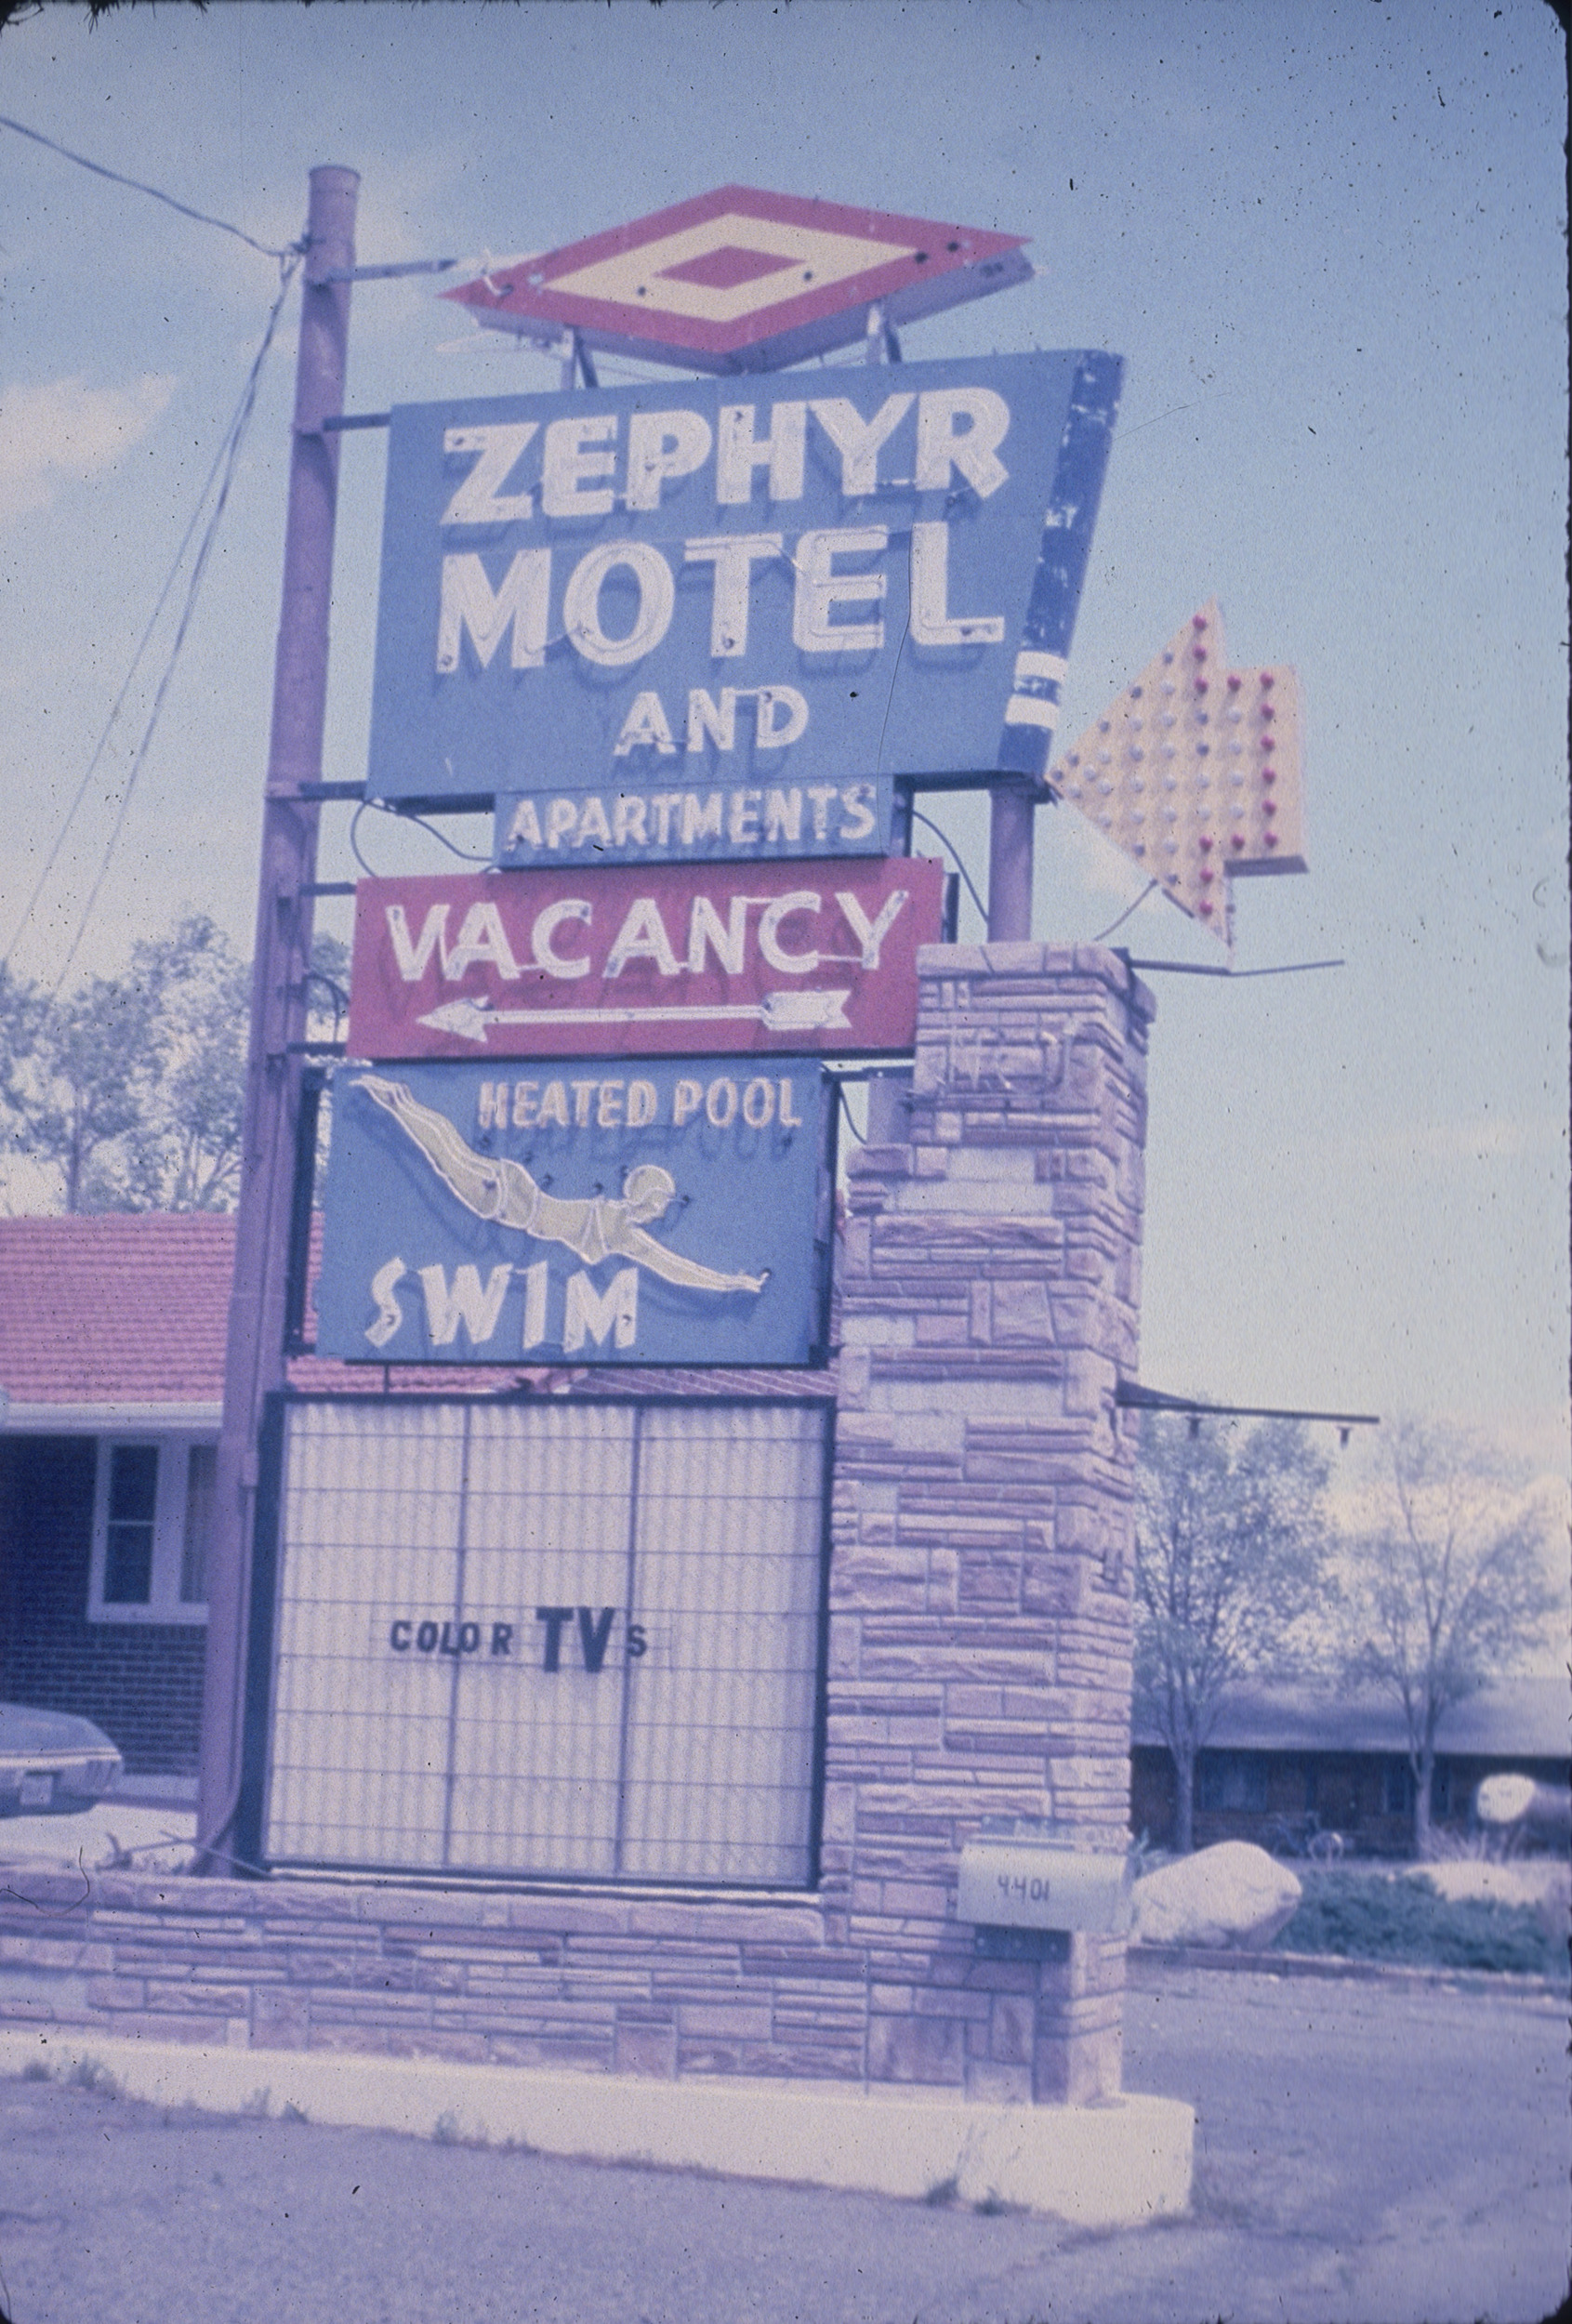 Slide of the neon sign for the Zephyr Motel, Reno, Nevada, 1986